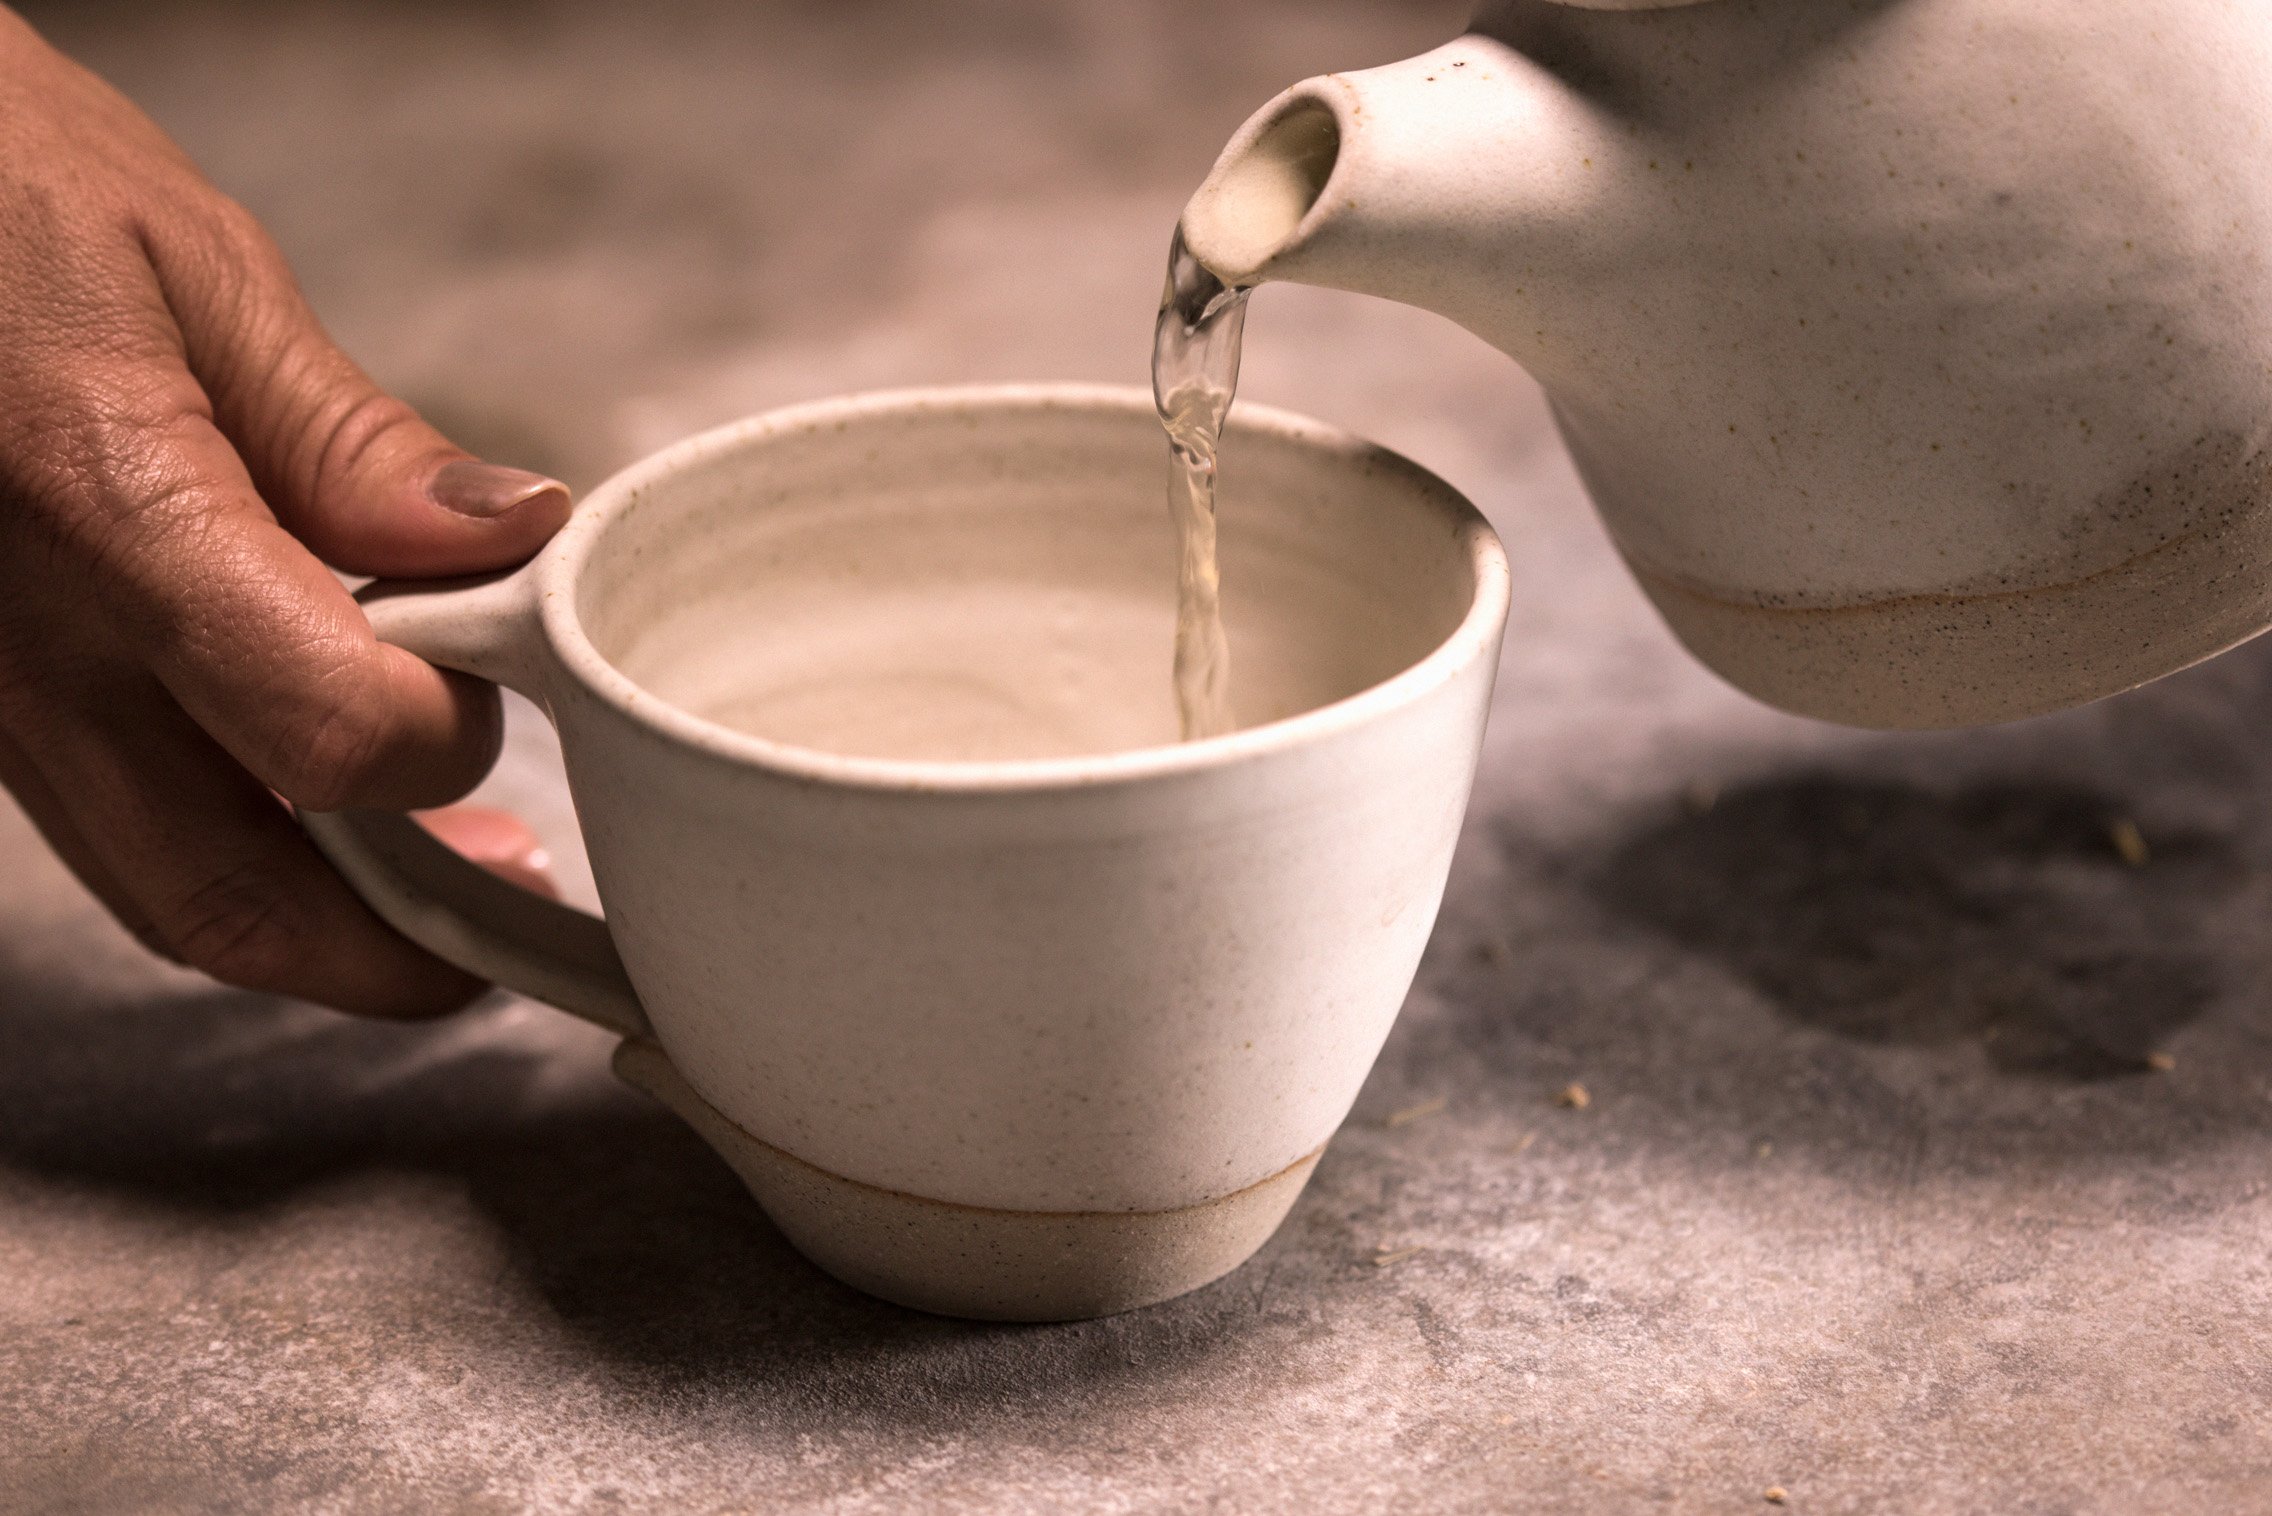 Pouring tea into a ceramic mug with matching ceramic teapot while holding on to mug on stone bench